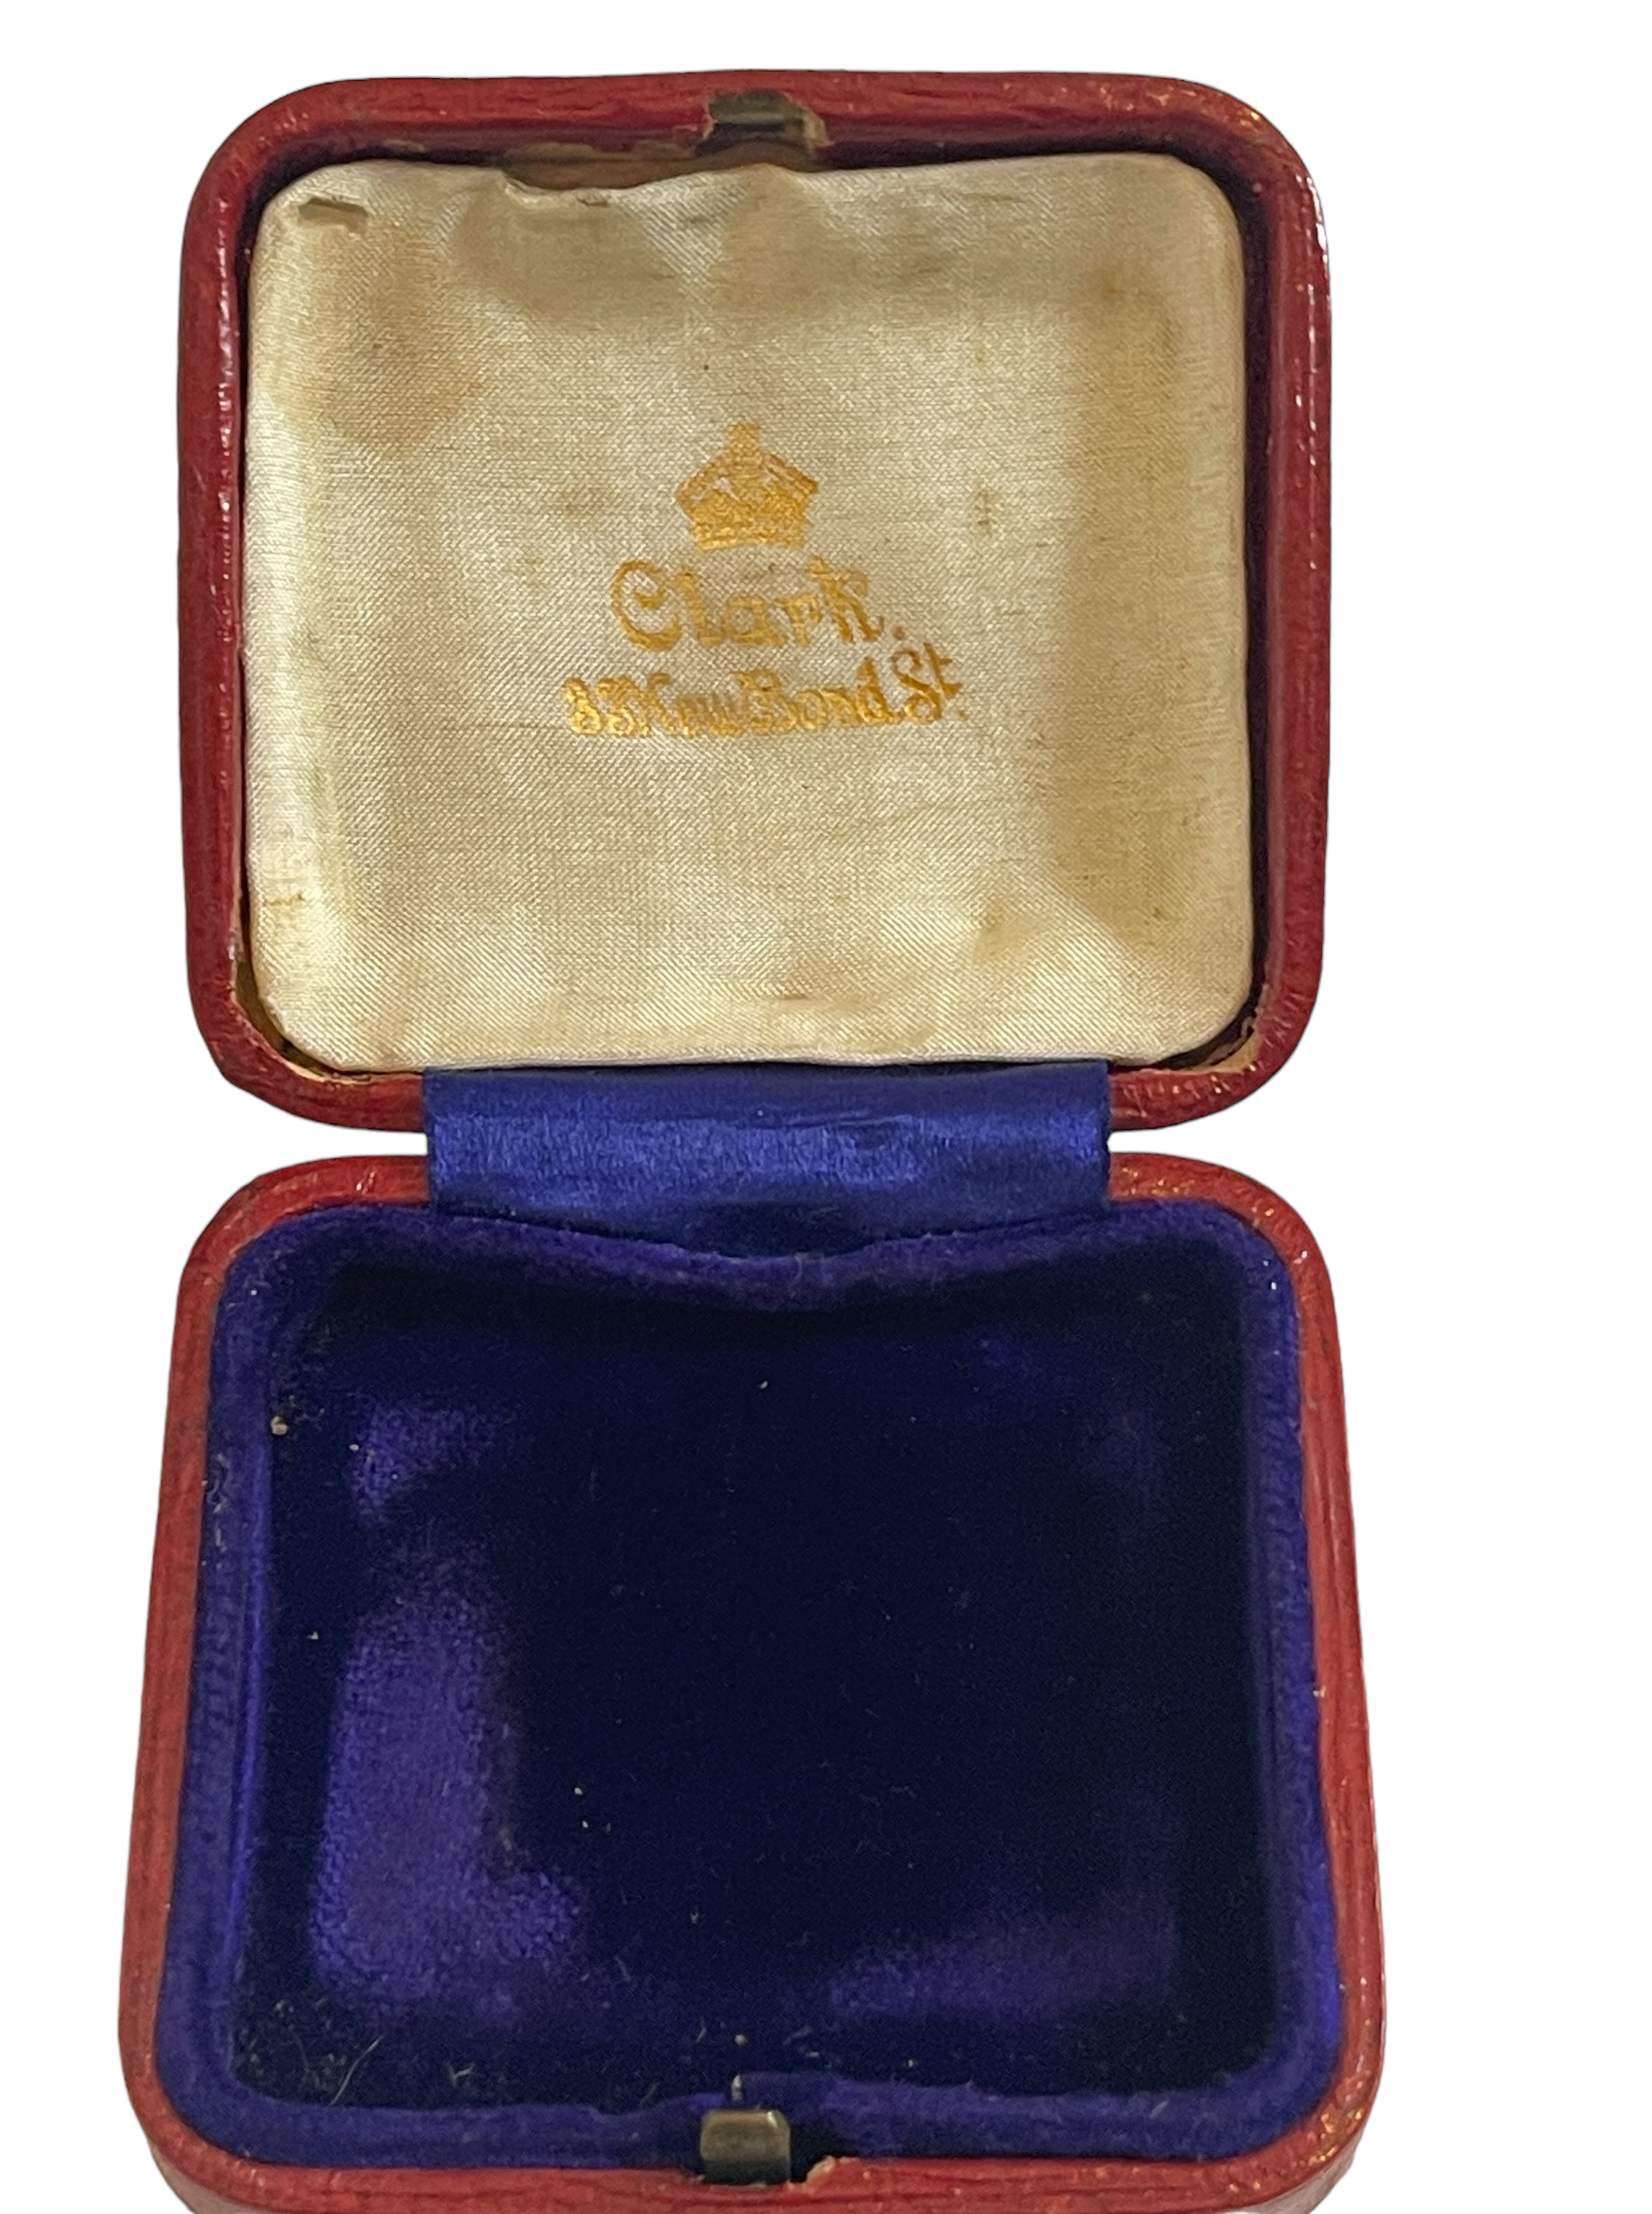 Alfred Clark New Bond St London Prince of Wales Feathers Cypher Boxed Vesta Case. - Image 3 of 13